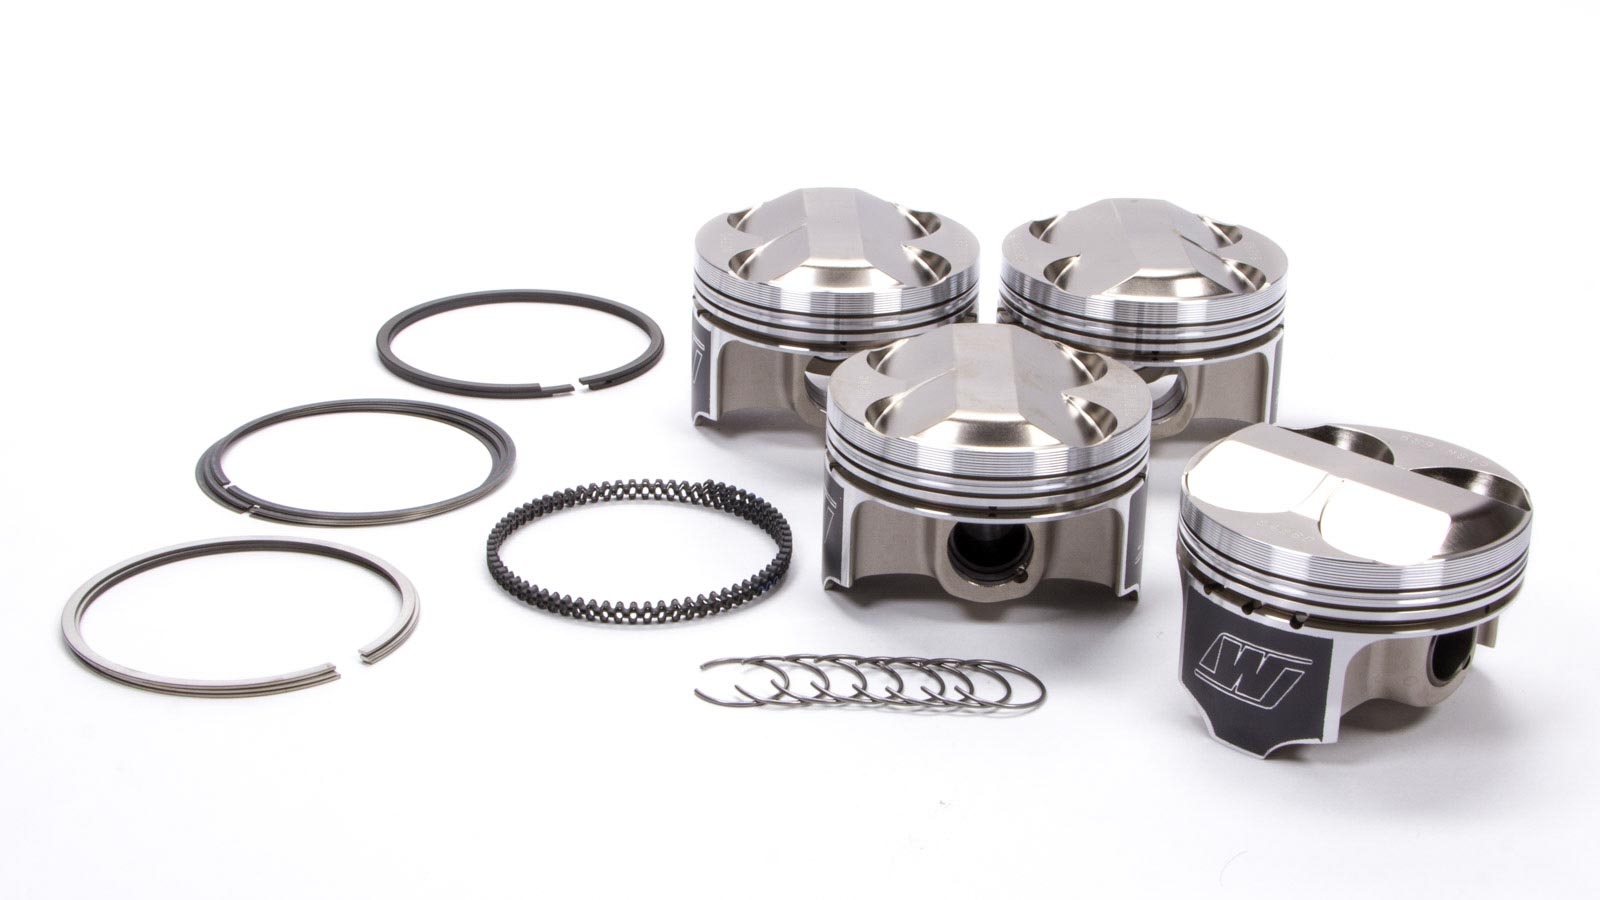 Wiseco K1675 3.503 Bore 10:1 Compression Ratio Domed Forged Piston Kit 